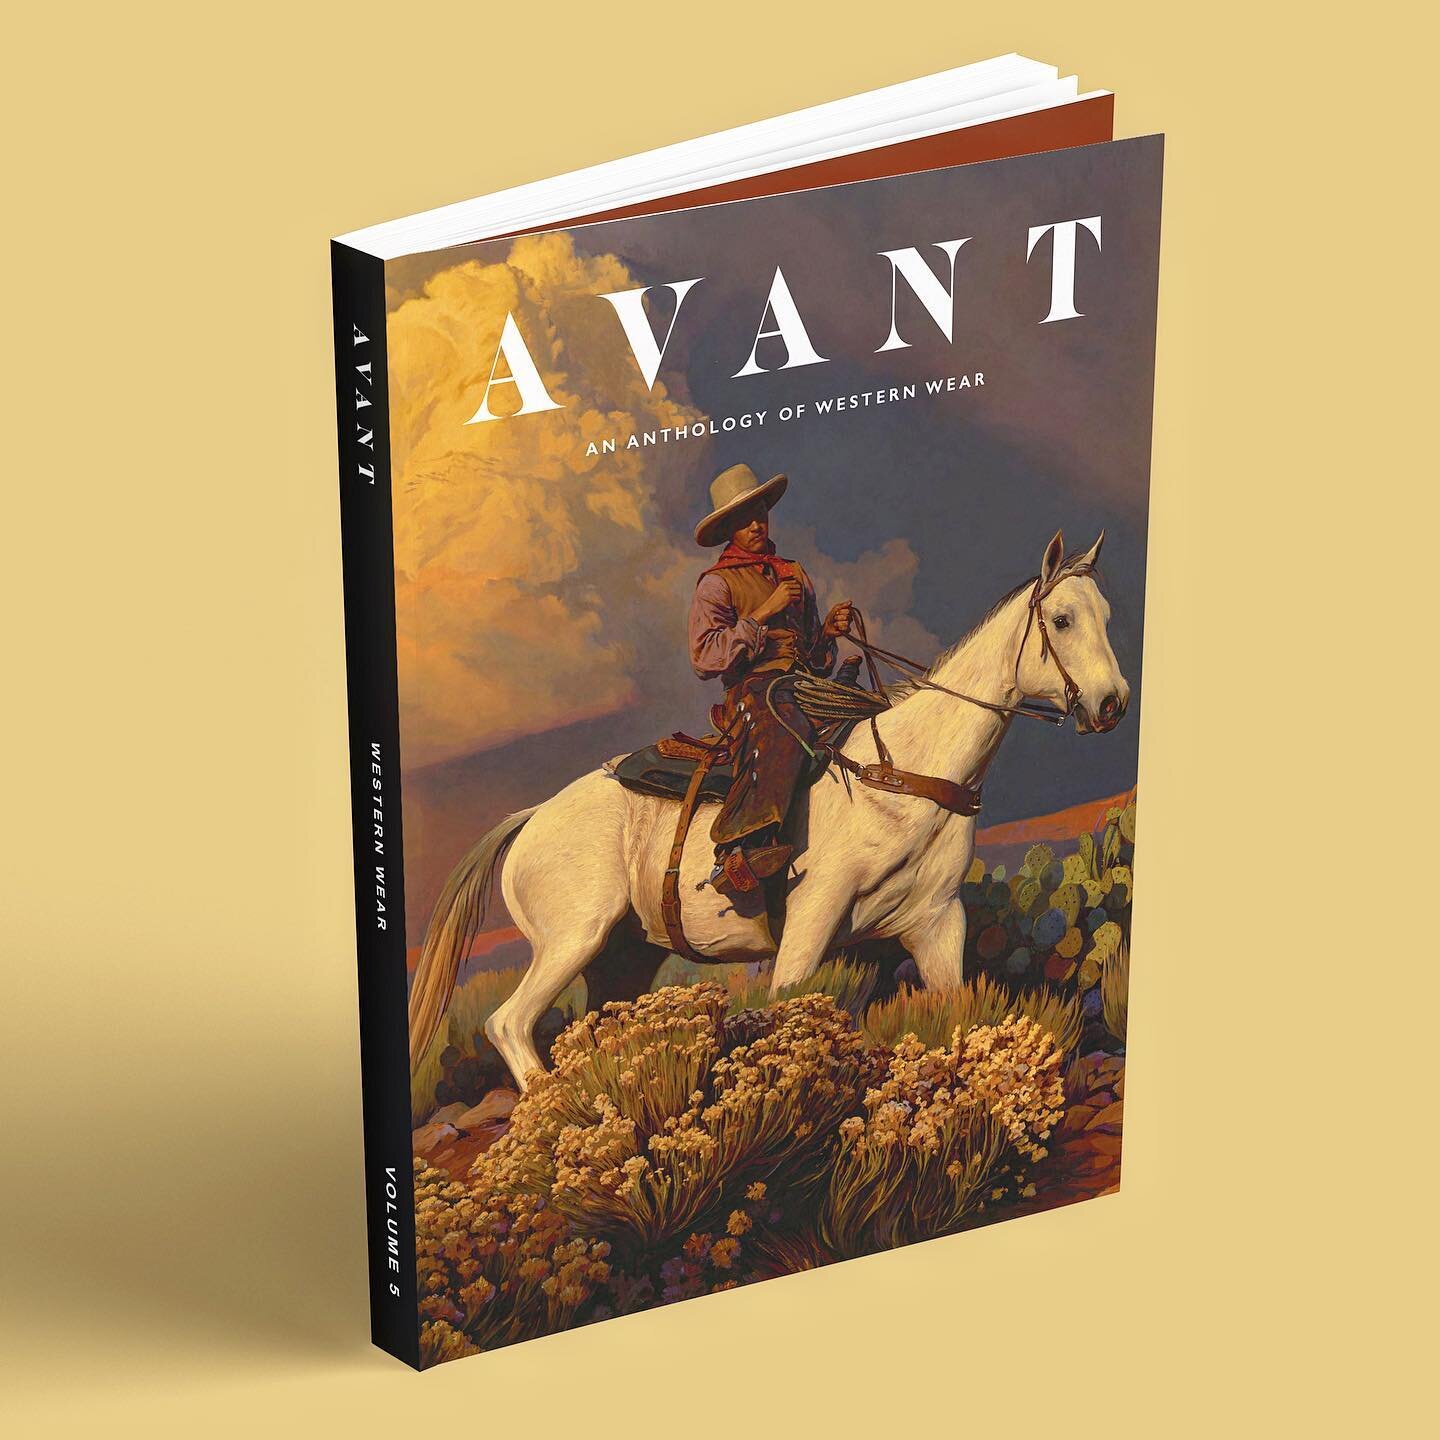 Avant 5, An Anthology of Western Wear, is now available for pre-order on theavantmag.com !
Who has already pre-ordered a copy ? Let us know !!!
Art cover by @markmaggiori ! 
#book #avant #avantmagazine #western #wear #westernwear #westernstyle #artco